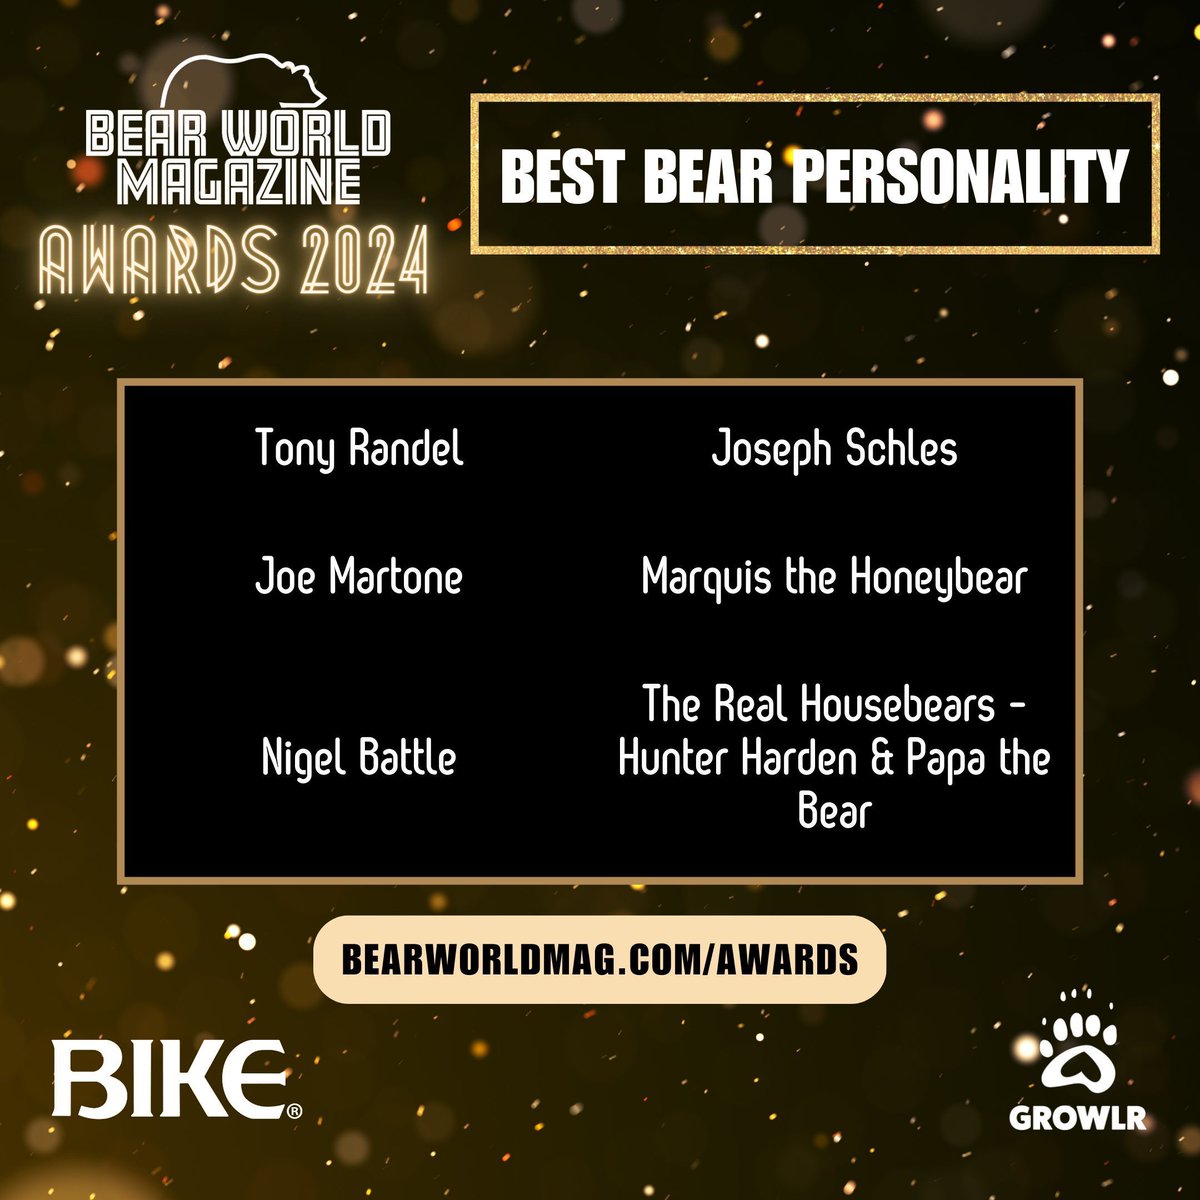 ✨ BEAR WORLD MAGAZINE AWARDS - Best Bear Personality Nominees ✨ Tony Randel @josephschles @laviejoem @MarquisHoney Nigel Battle @RealHousebears Vote now at buff.ly/3IGaFf5 Presented by @bikeathletics & sponsored by @growlr and The Crown & Anchor